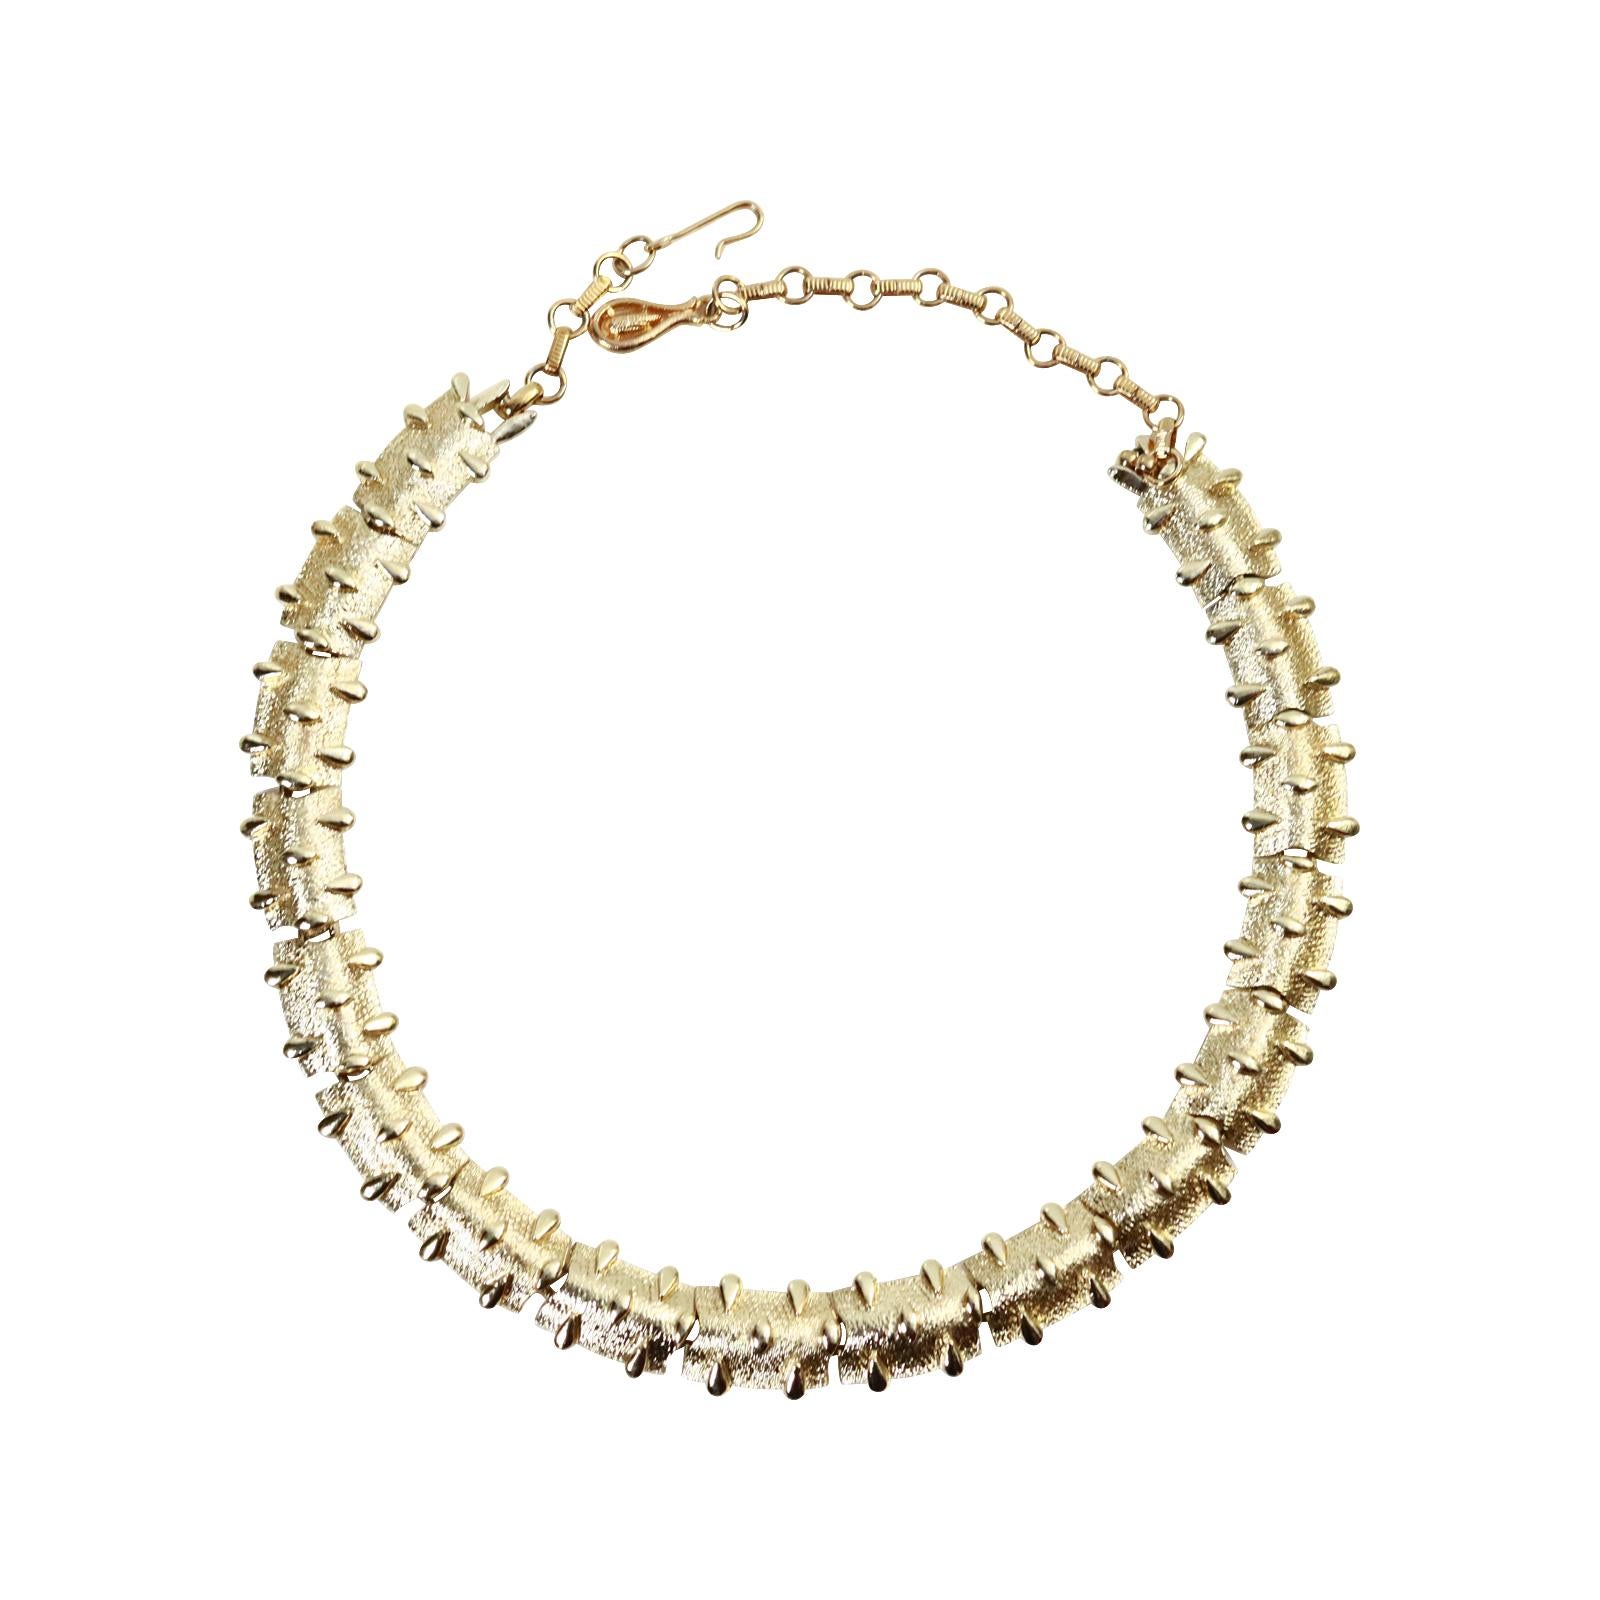 Vintage Coro Gold Tone Nubby Choker Circa 1970s. This is a great choker. Just a quick throw on hat will look great with a white t-shirt or white shirt and jeans and elevate your look.  It also has enough chain that you could wear it lower should you